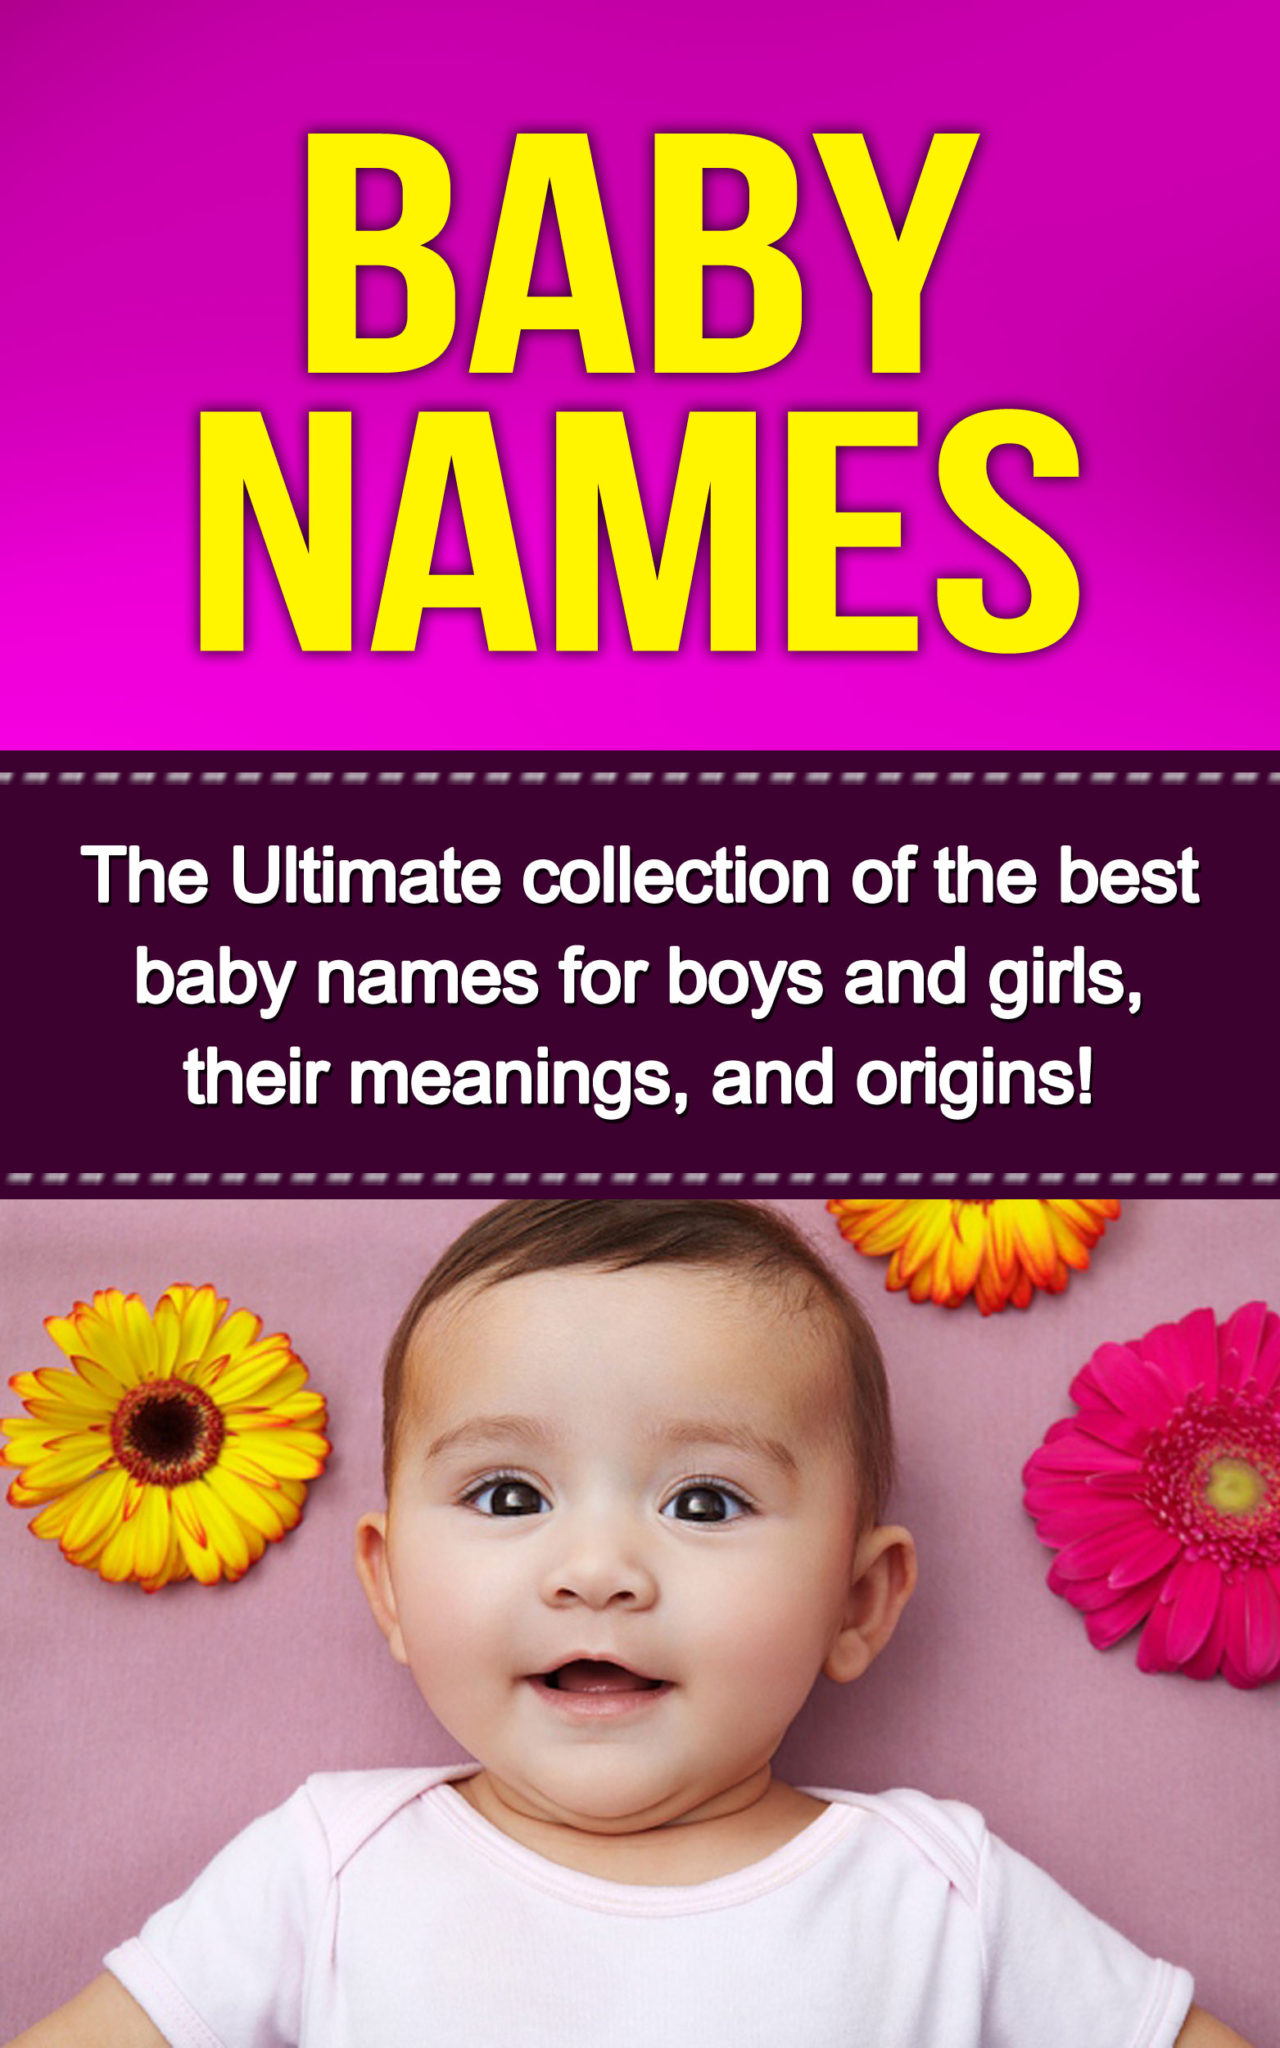 FREE: Baby Names: The Ultimate collection of the best baby names for boys and girls, their meanings, and origins! by Judith Dare